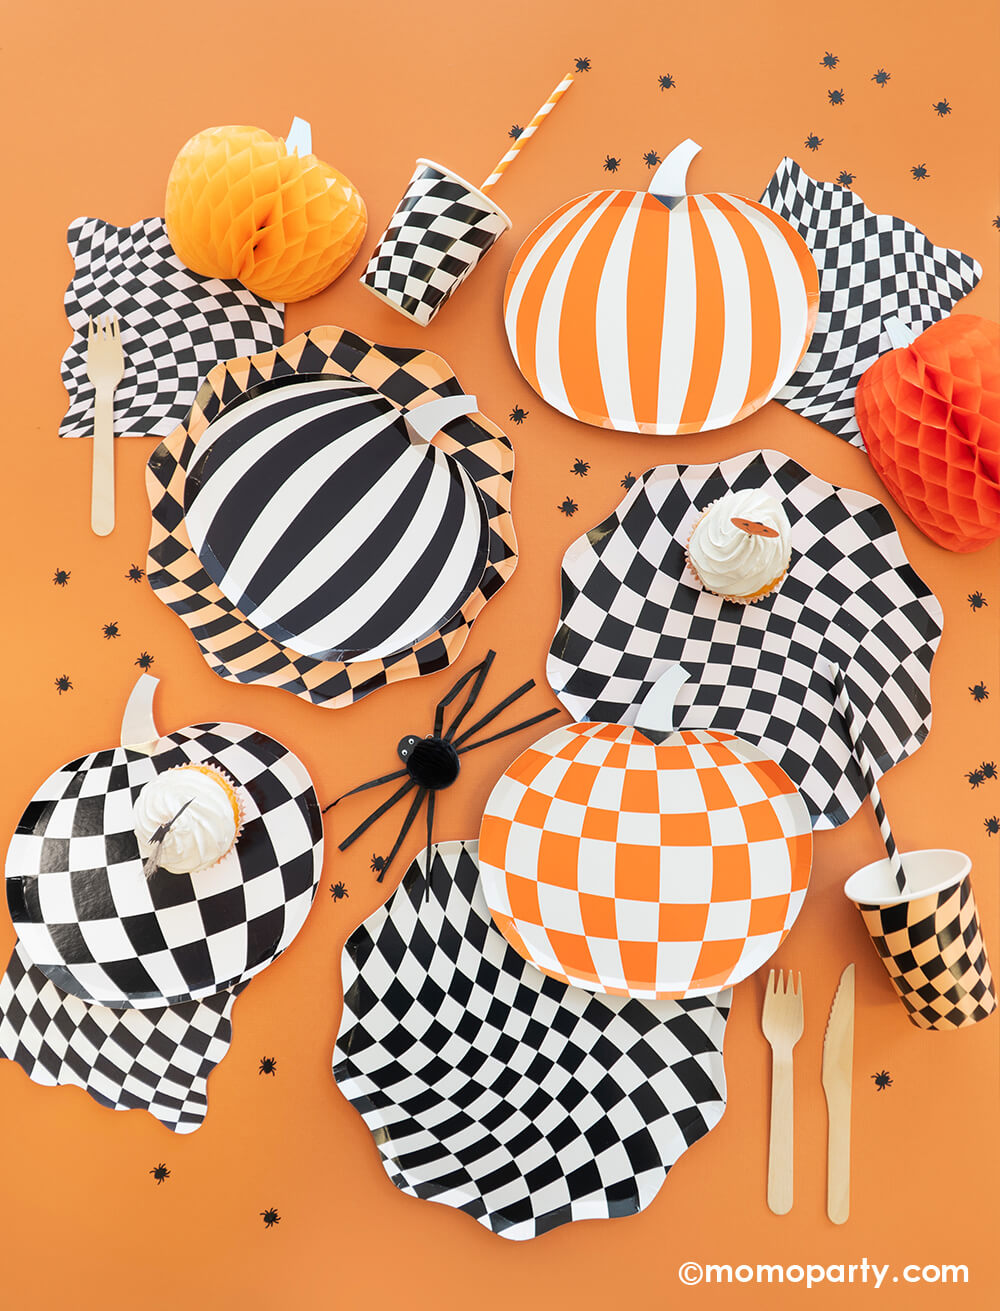 A classic Halloween orange and black party table by Momo Party featuring swirl checkered plates, napkins and cups by Meri Meri, along with mod and stripe patterned pumpkin shaped plates in black and orange. Makes it a classic Halloween look for a spooky fun Halloween bash!